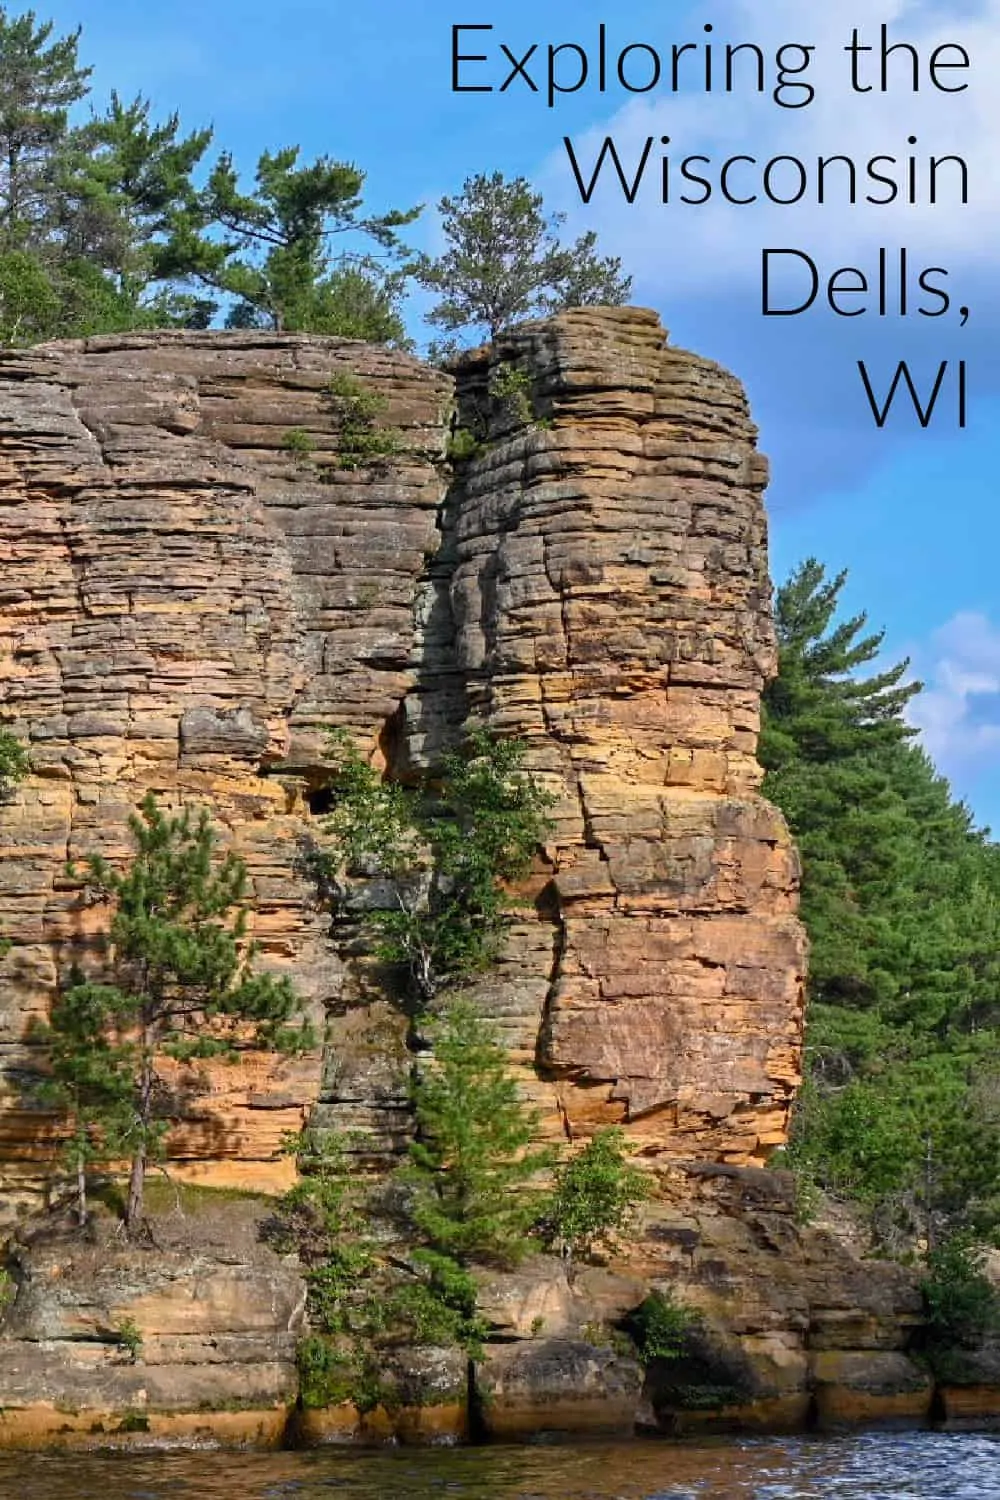 Explore the gorgeous and adventurous outdoor activities you can have around Wisconsin Dells, WI including hiking and boating along its limestone cliff shores. #midwestroadtrip #boating @travelWI